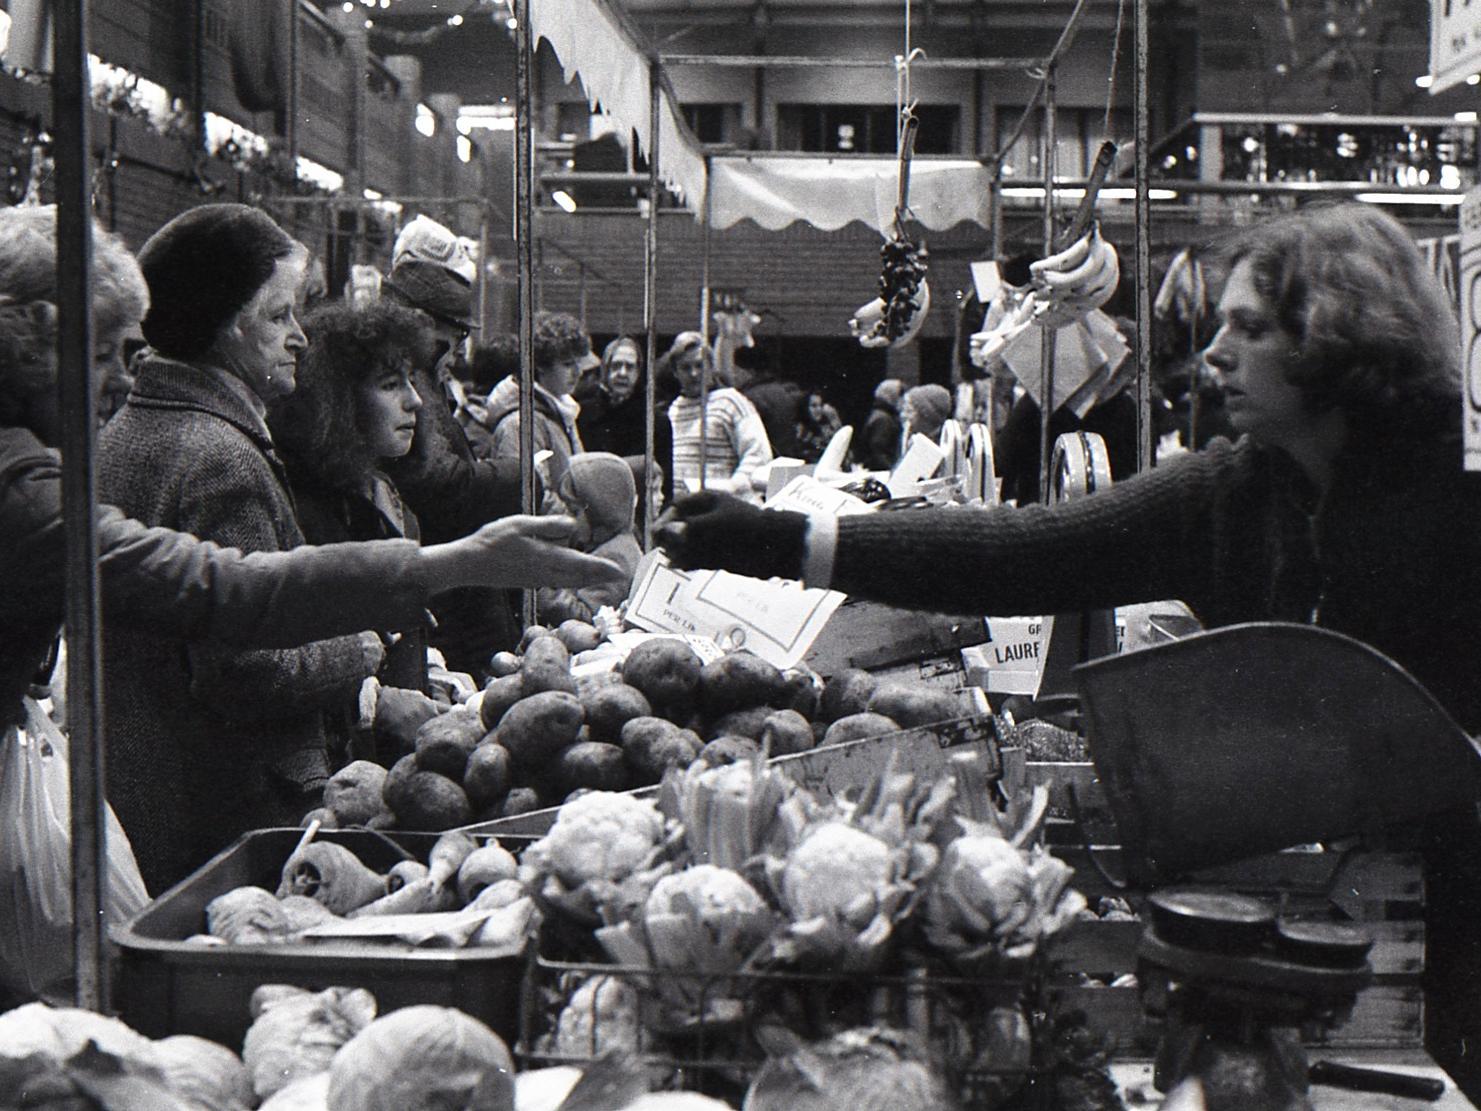 Busy shoppers at the vegetable stall. Photo: Living Archive MK